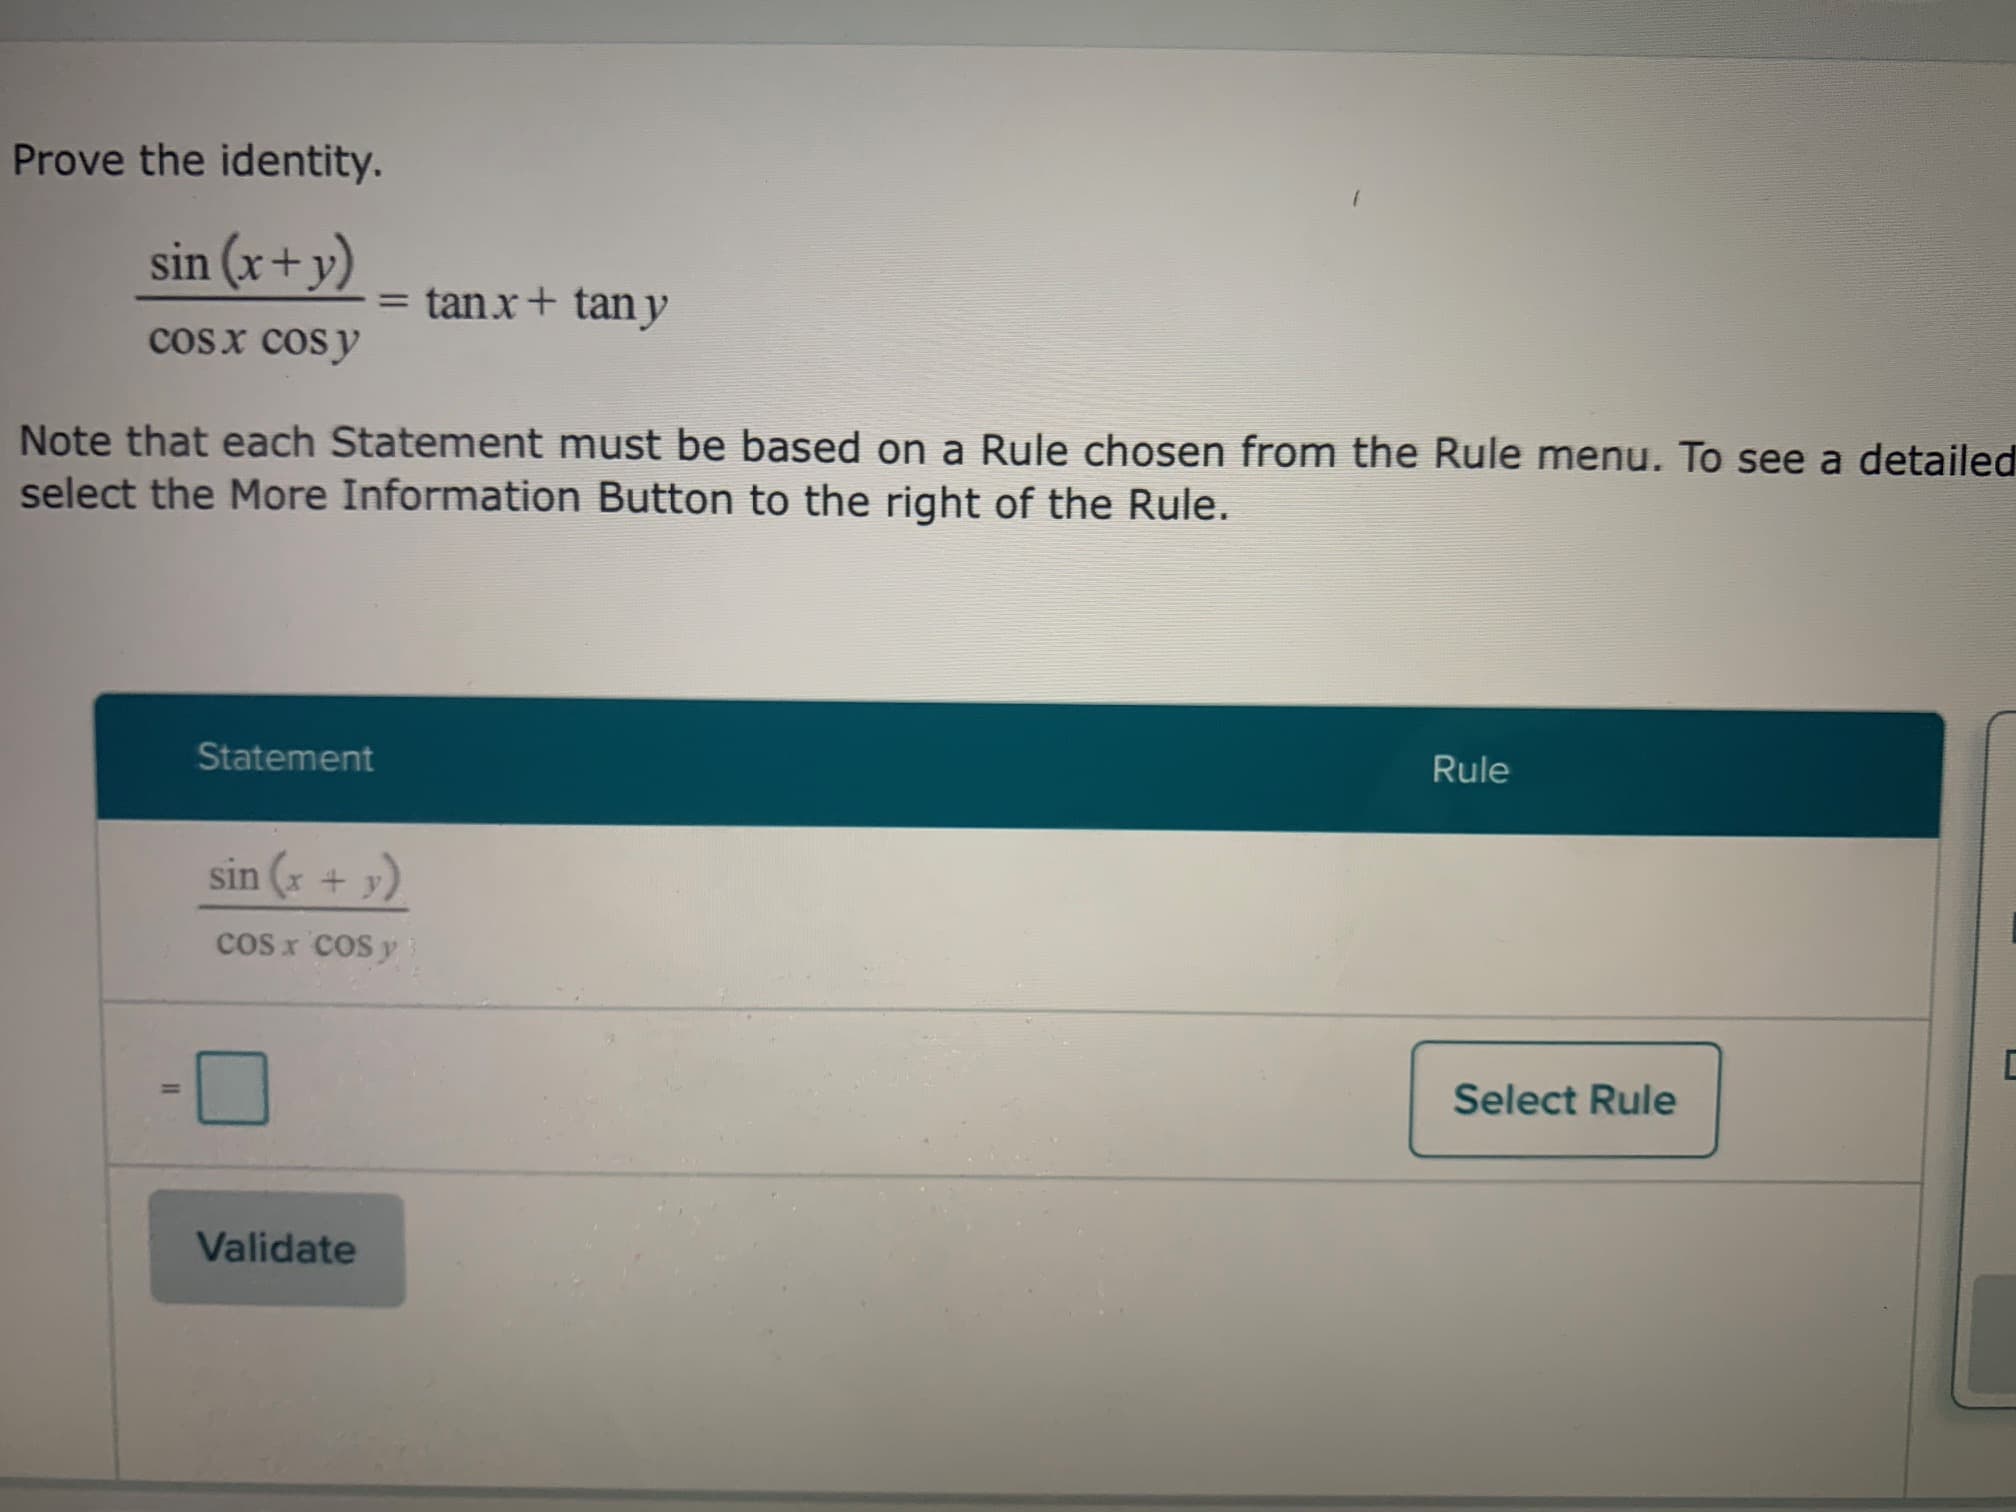 Prove the identity.
sin (x+y)
= tanx+ tan y
cosx cosy
Note that each Statement must be based on a Rule chosen from the Rule menu. To see a detailer
select the More Information Button to the right of the Rule.
Statement
Rule
sin (x + y)
cos x cos y
%3D
Select Rule
